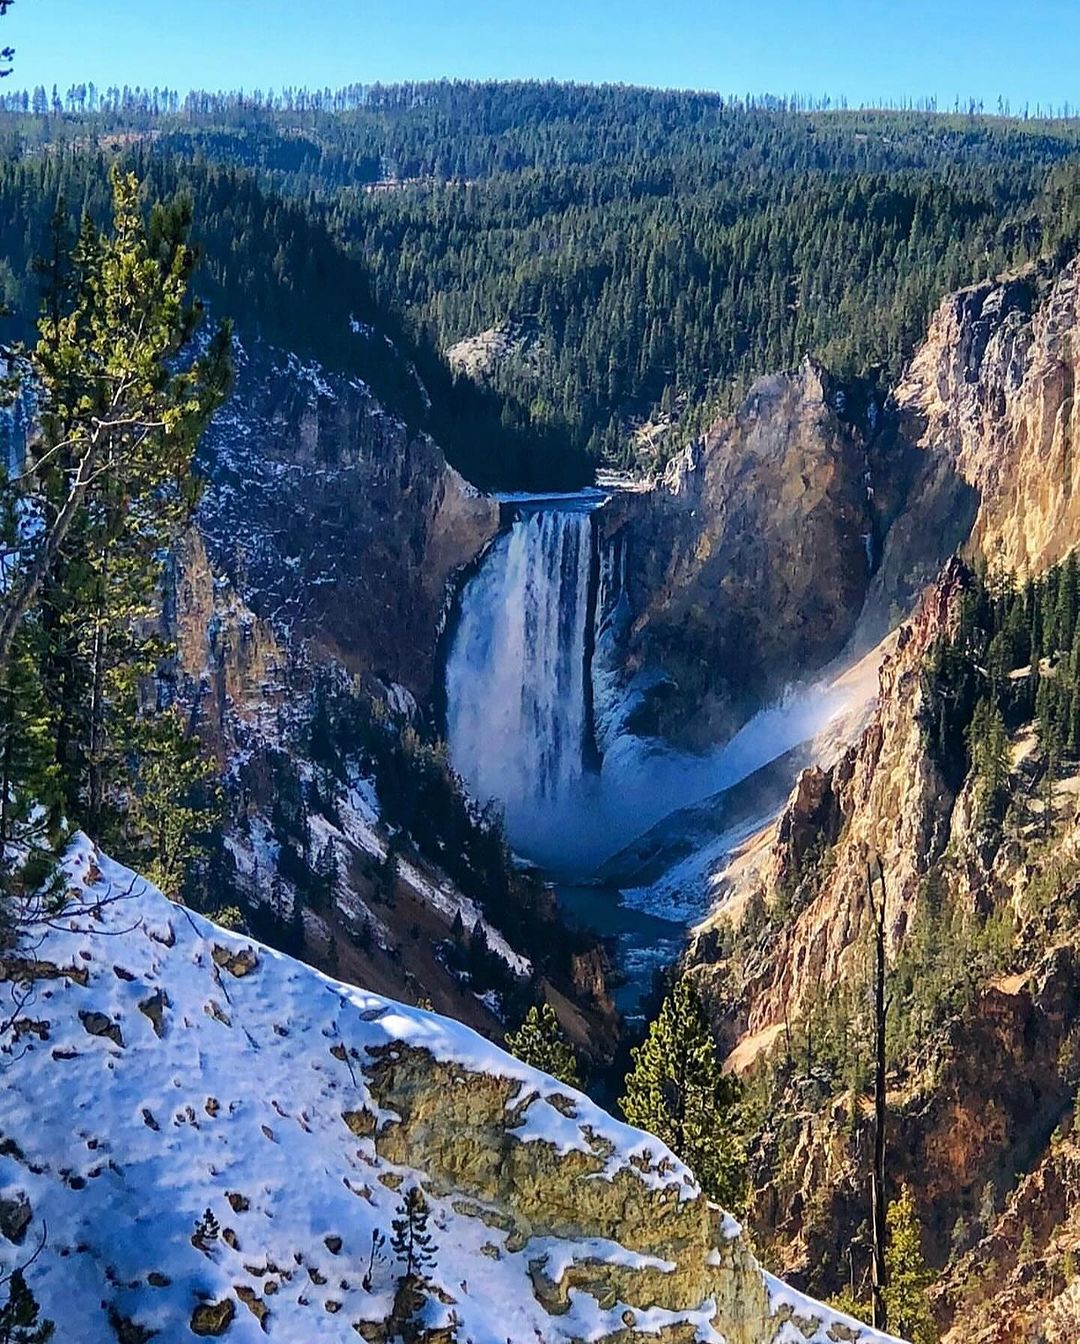 @parkwayinnjh sharing some of Yellowstone’s majestic beauty!! Have you visite...